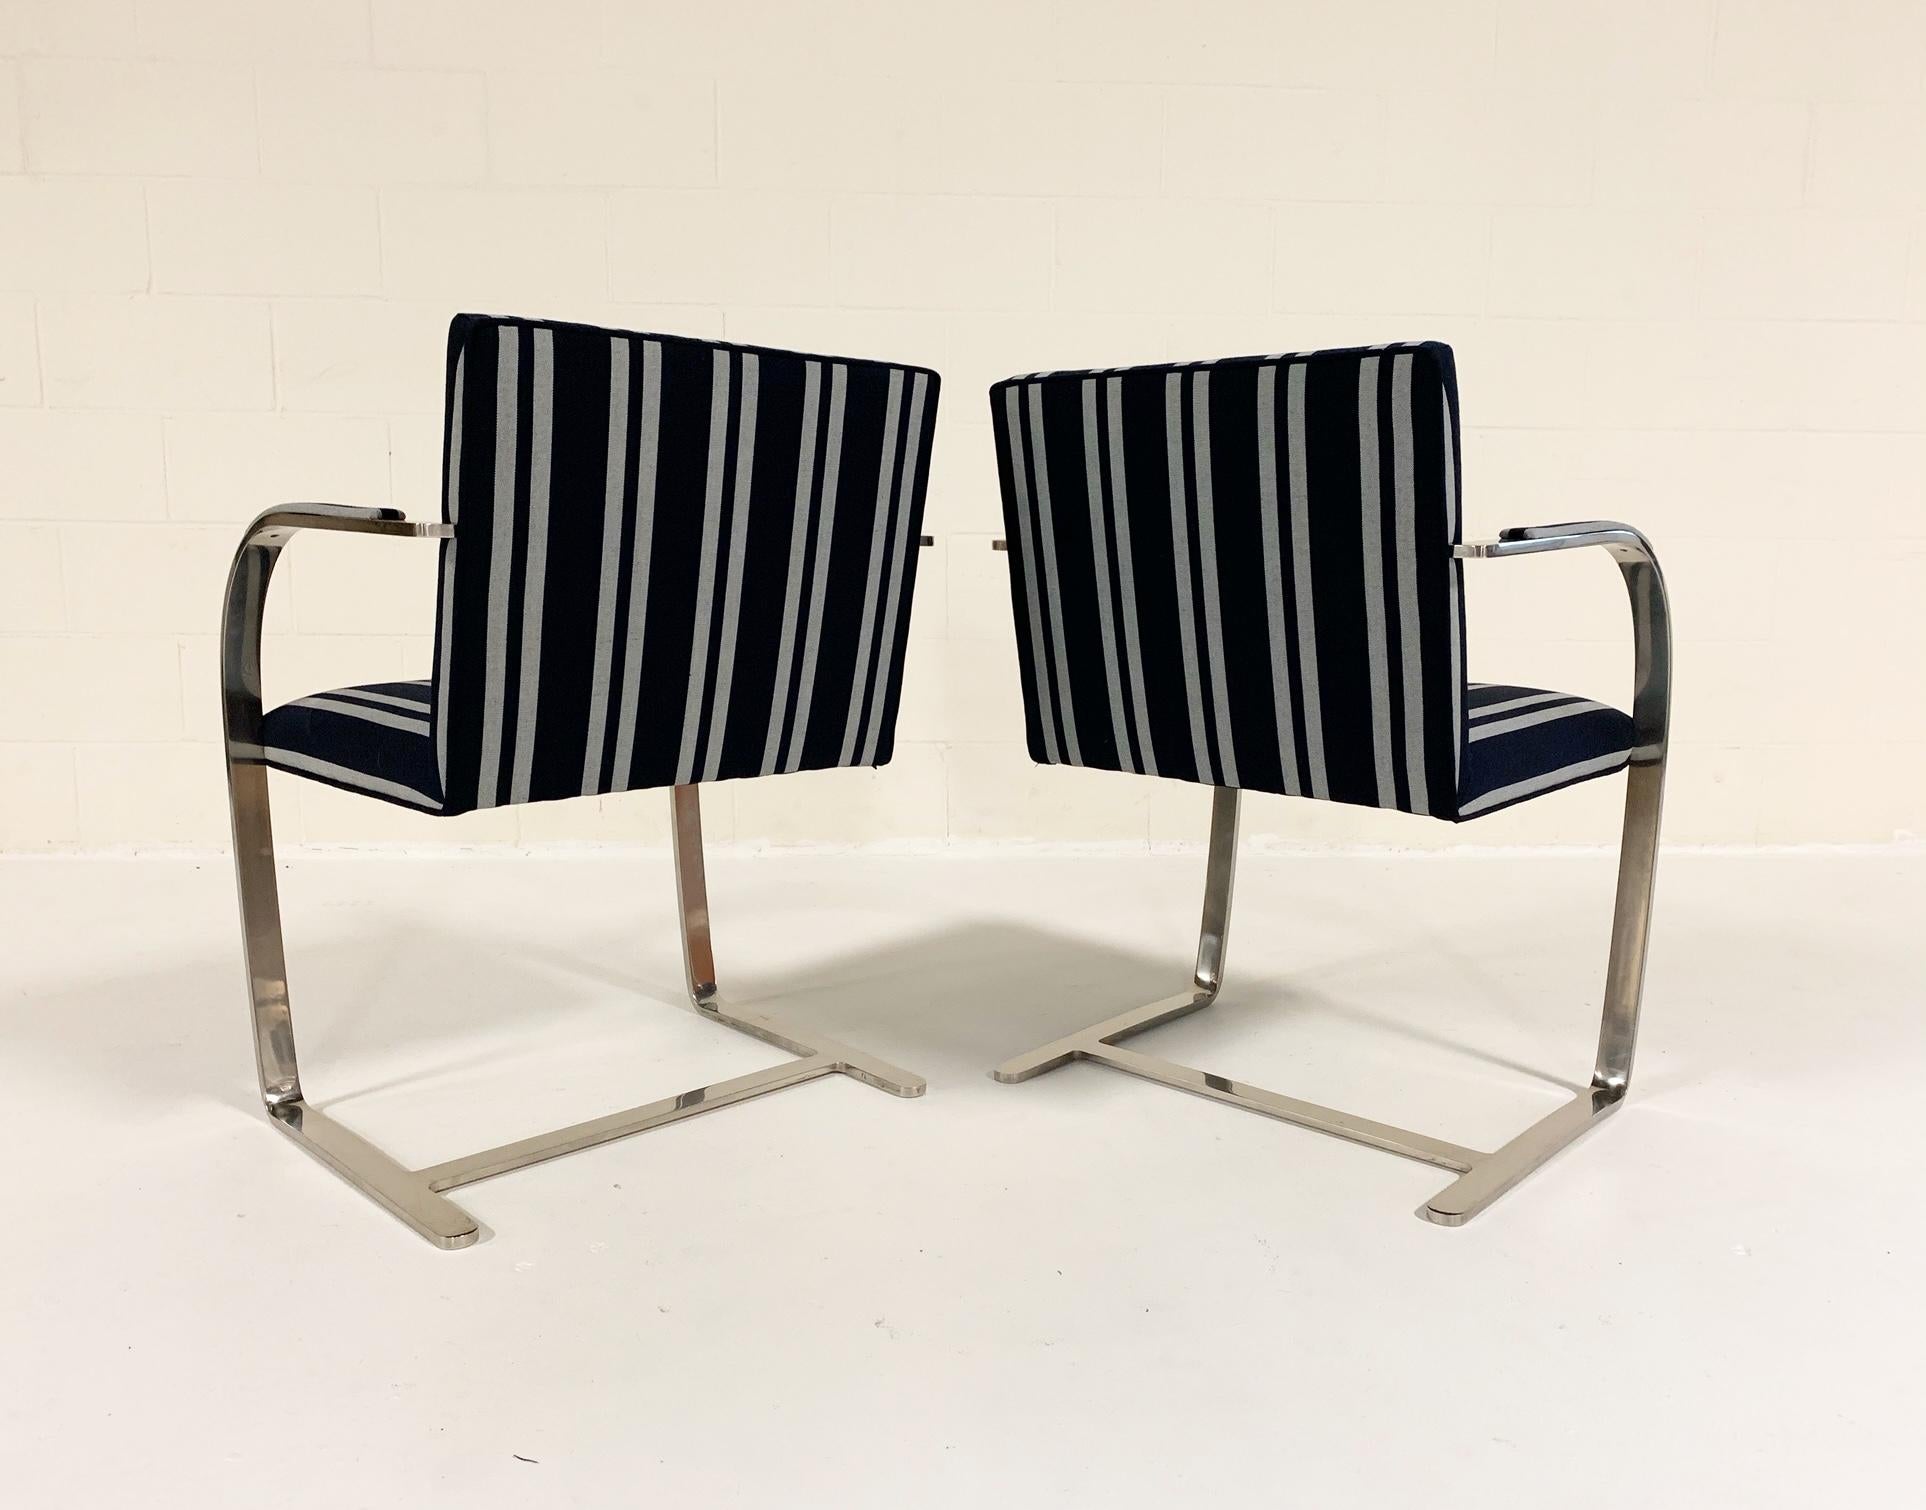 Kule x Forsyth Collection Ludwig Mies van der Rohe Brno Chairs, Pair 1